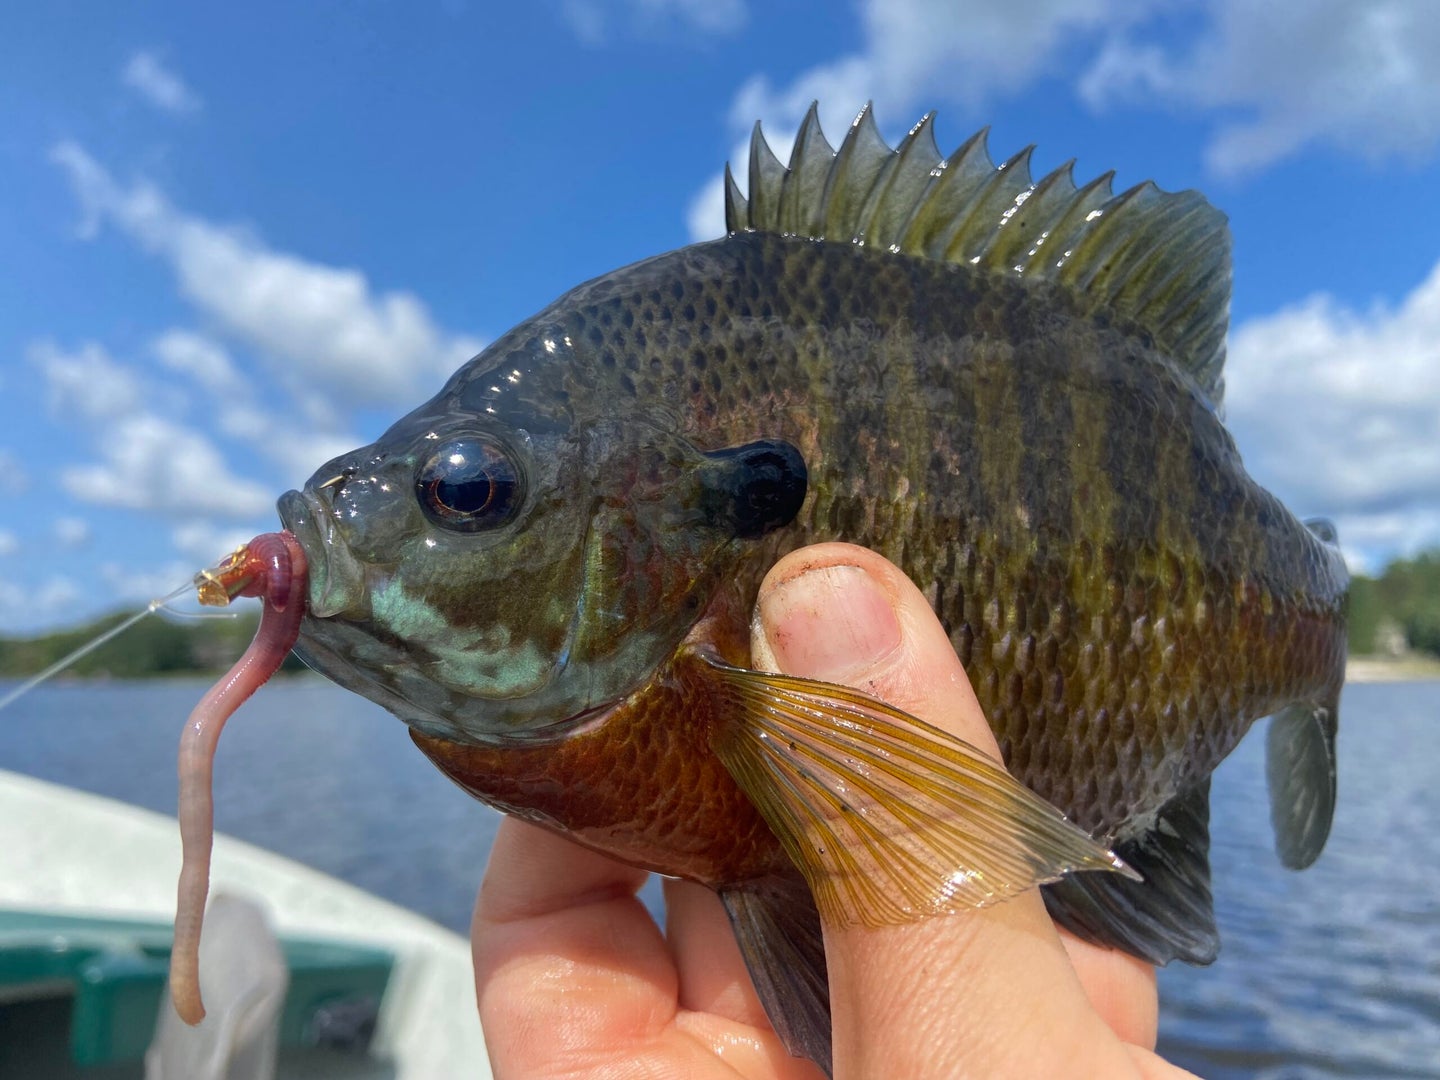 Fisherman holds a bluegill sunfish with a worm in its mouth